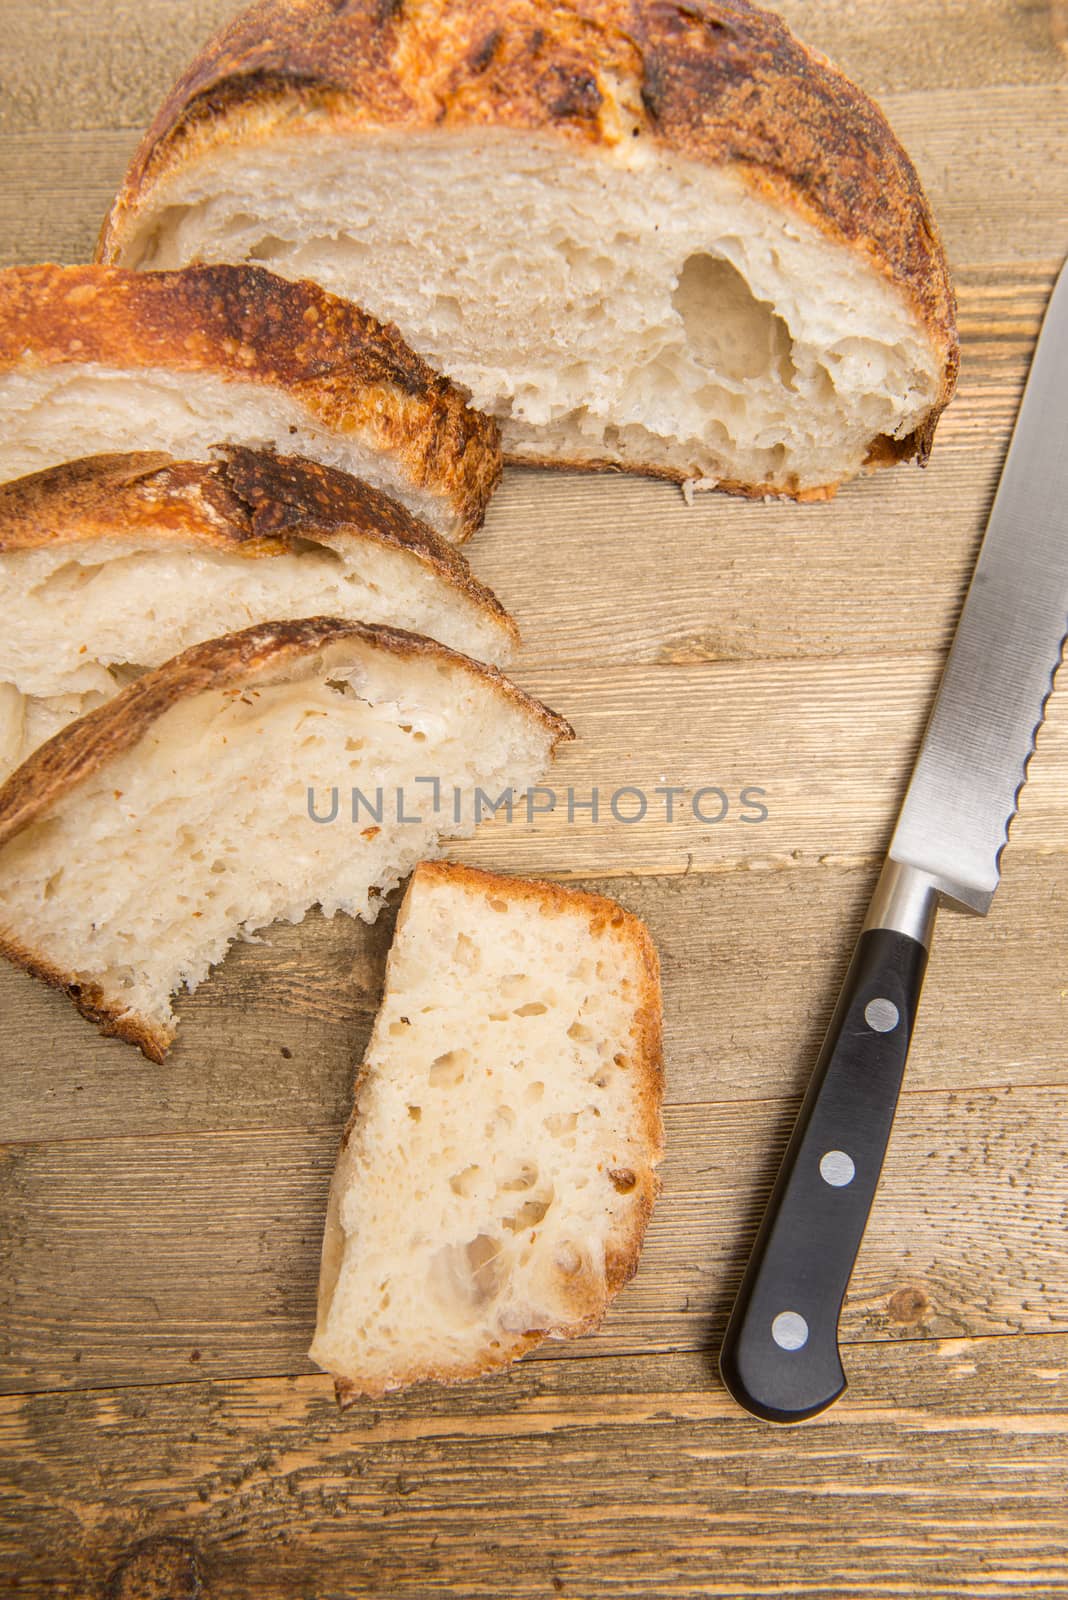 Freshly cut slices of white artisan sourdough bread on isolated a white background.